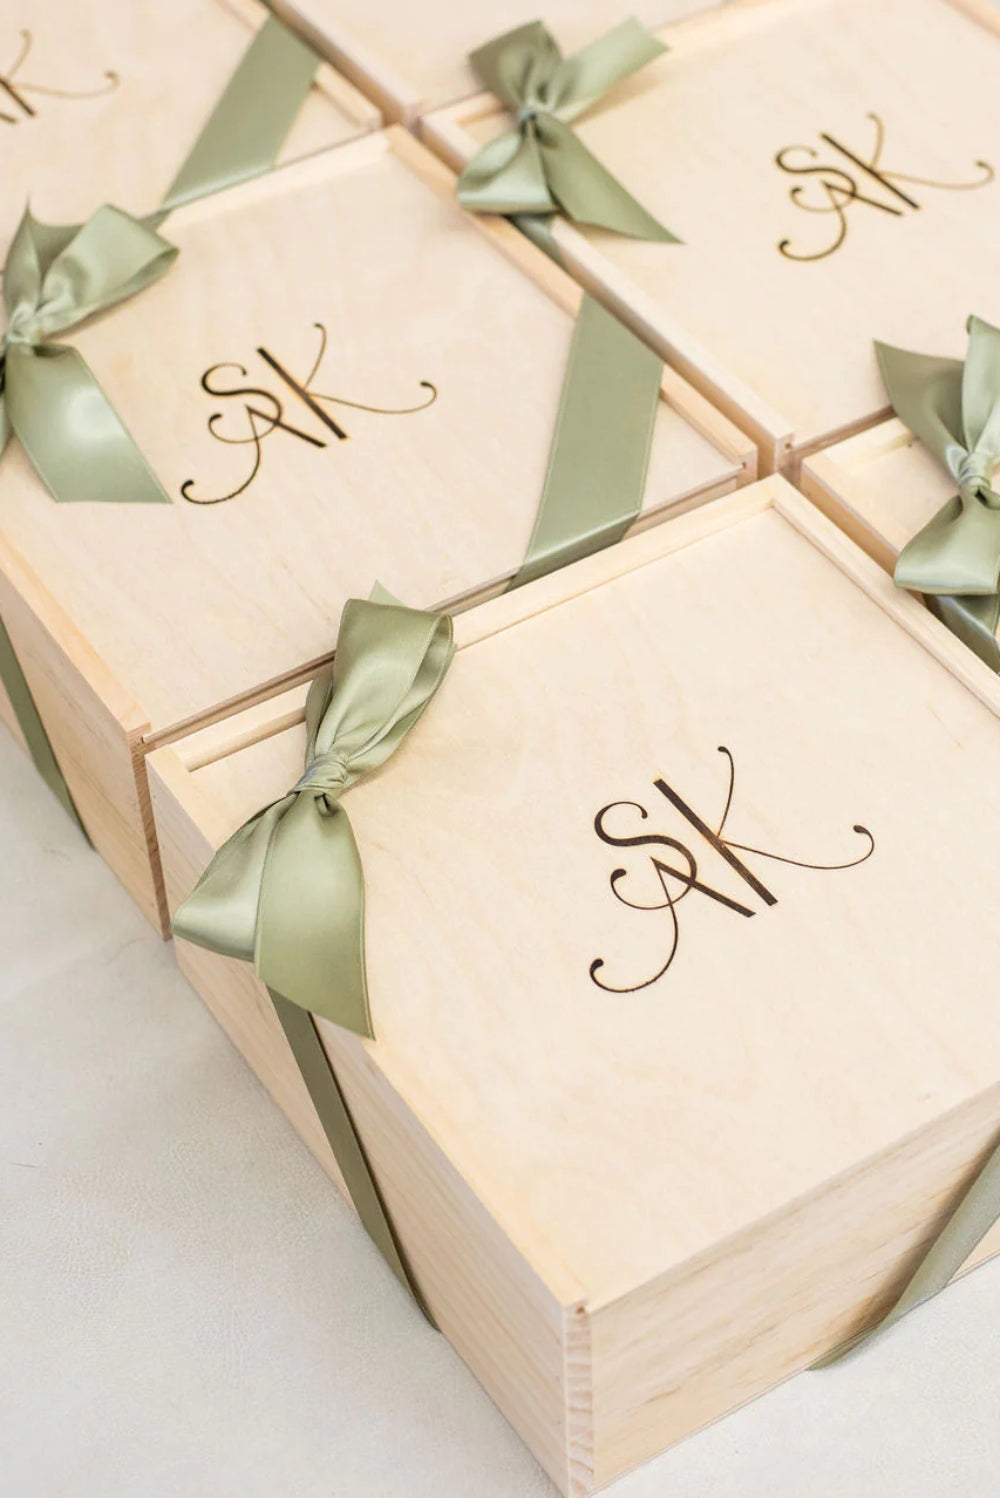 Bloom & Press - Favors & Gifts - Colorado Springs, CO - WeddingWire